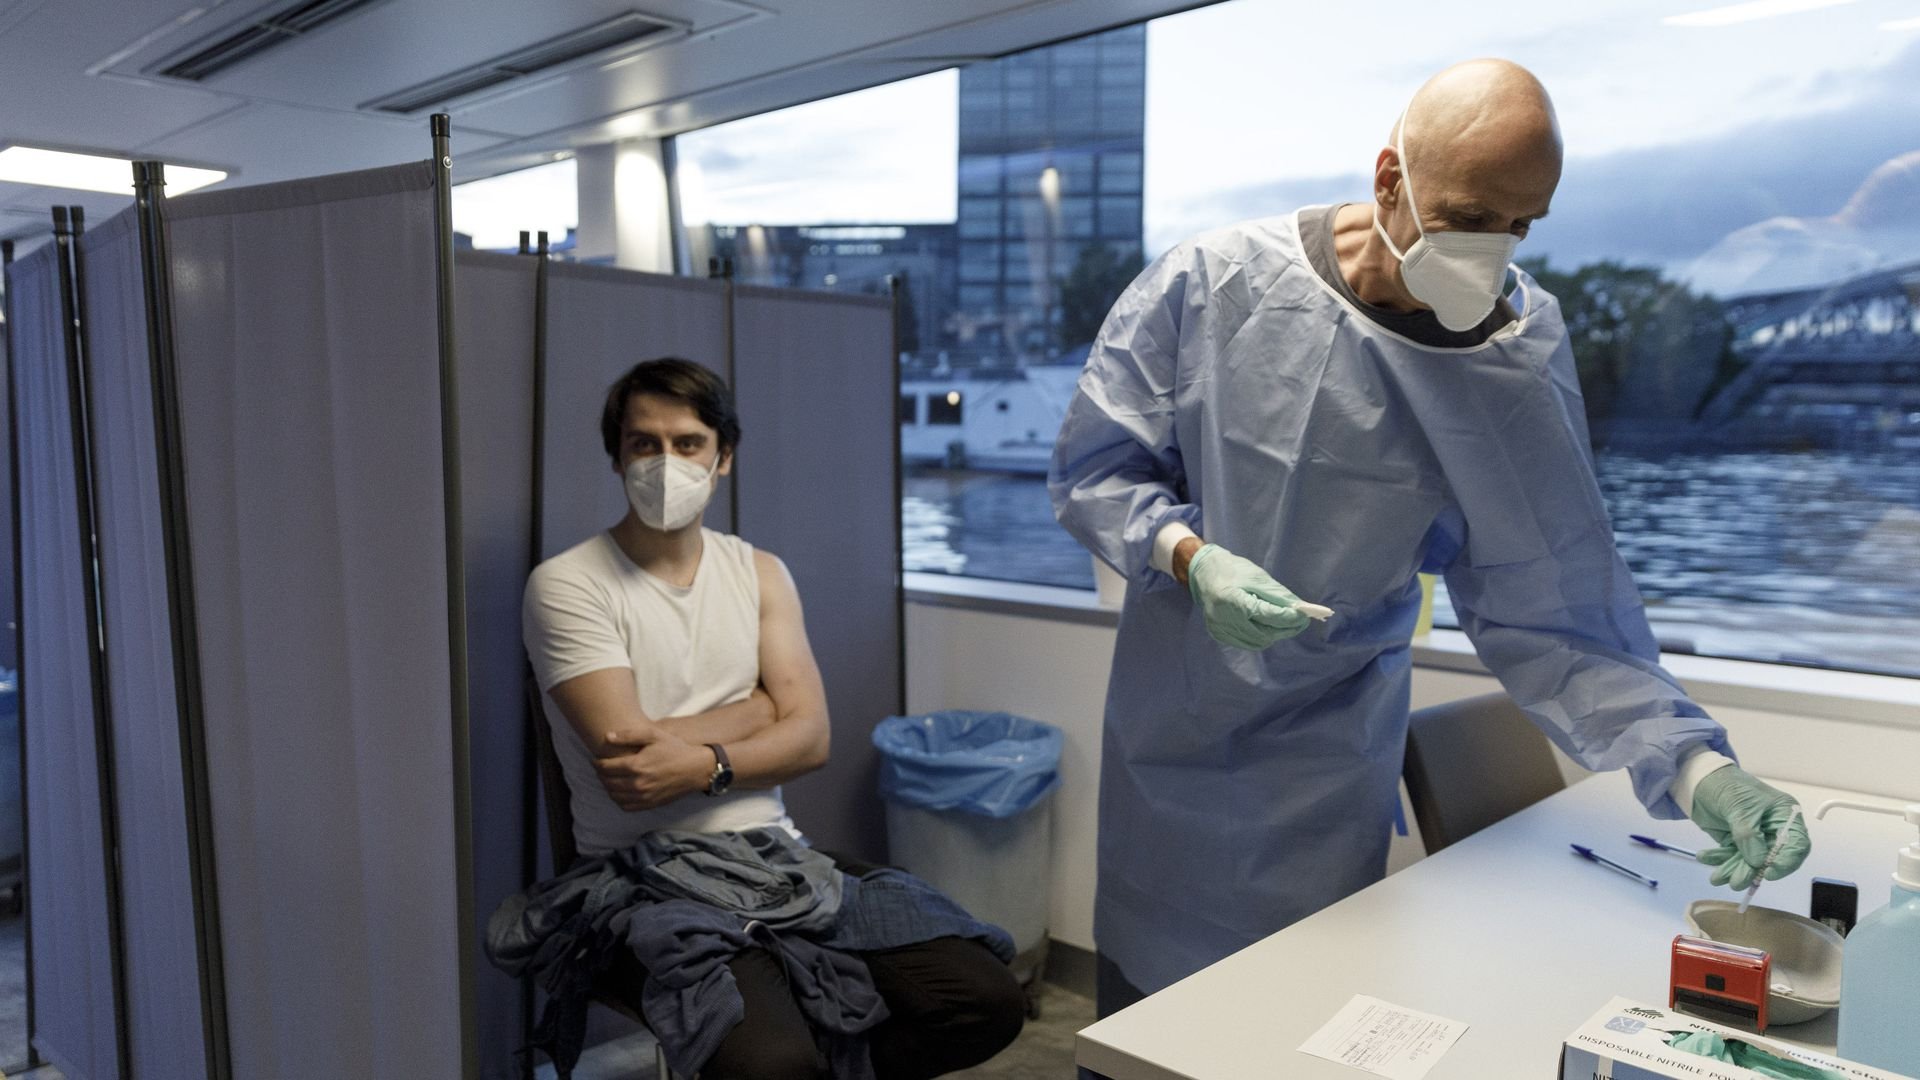 Germany ending quarantine subsidies for unvaccinated workers